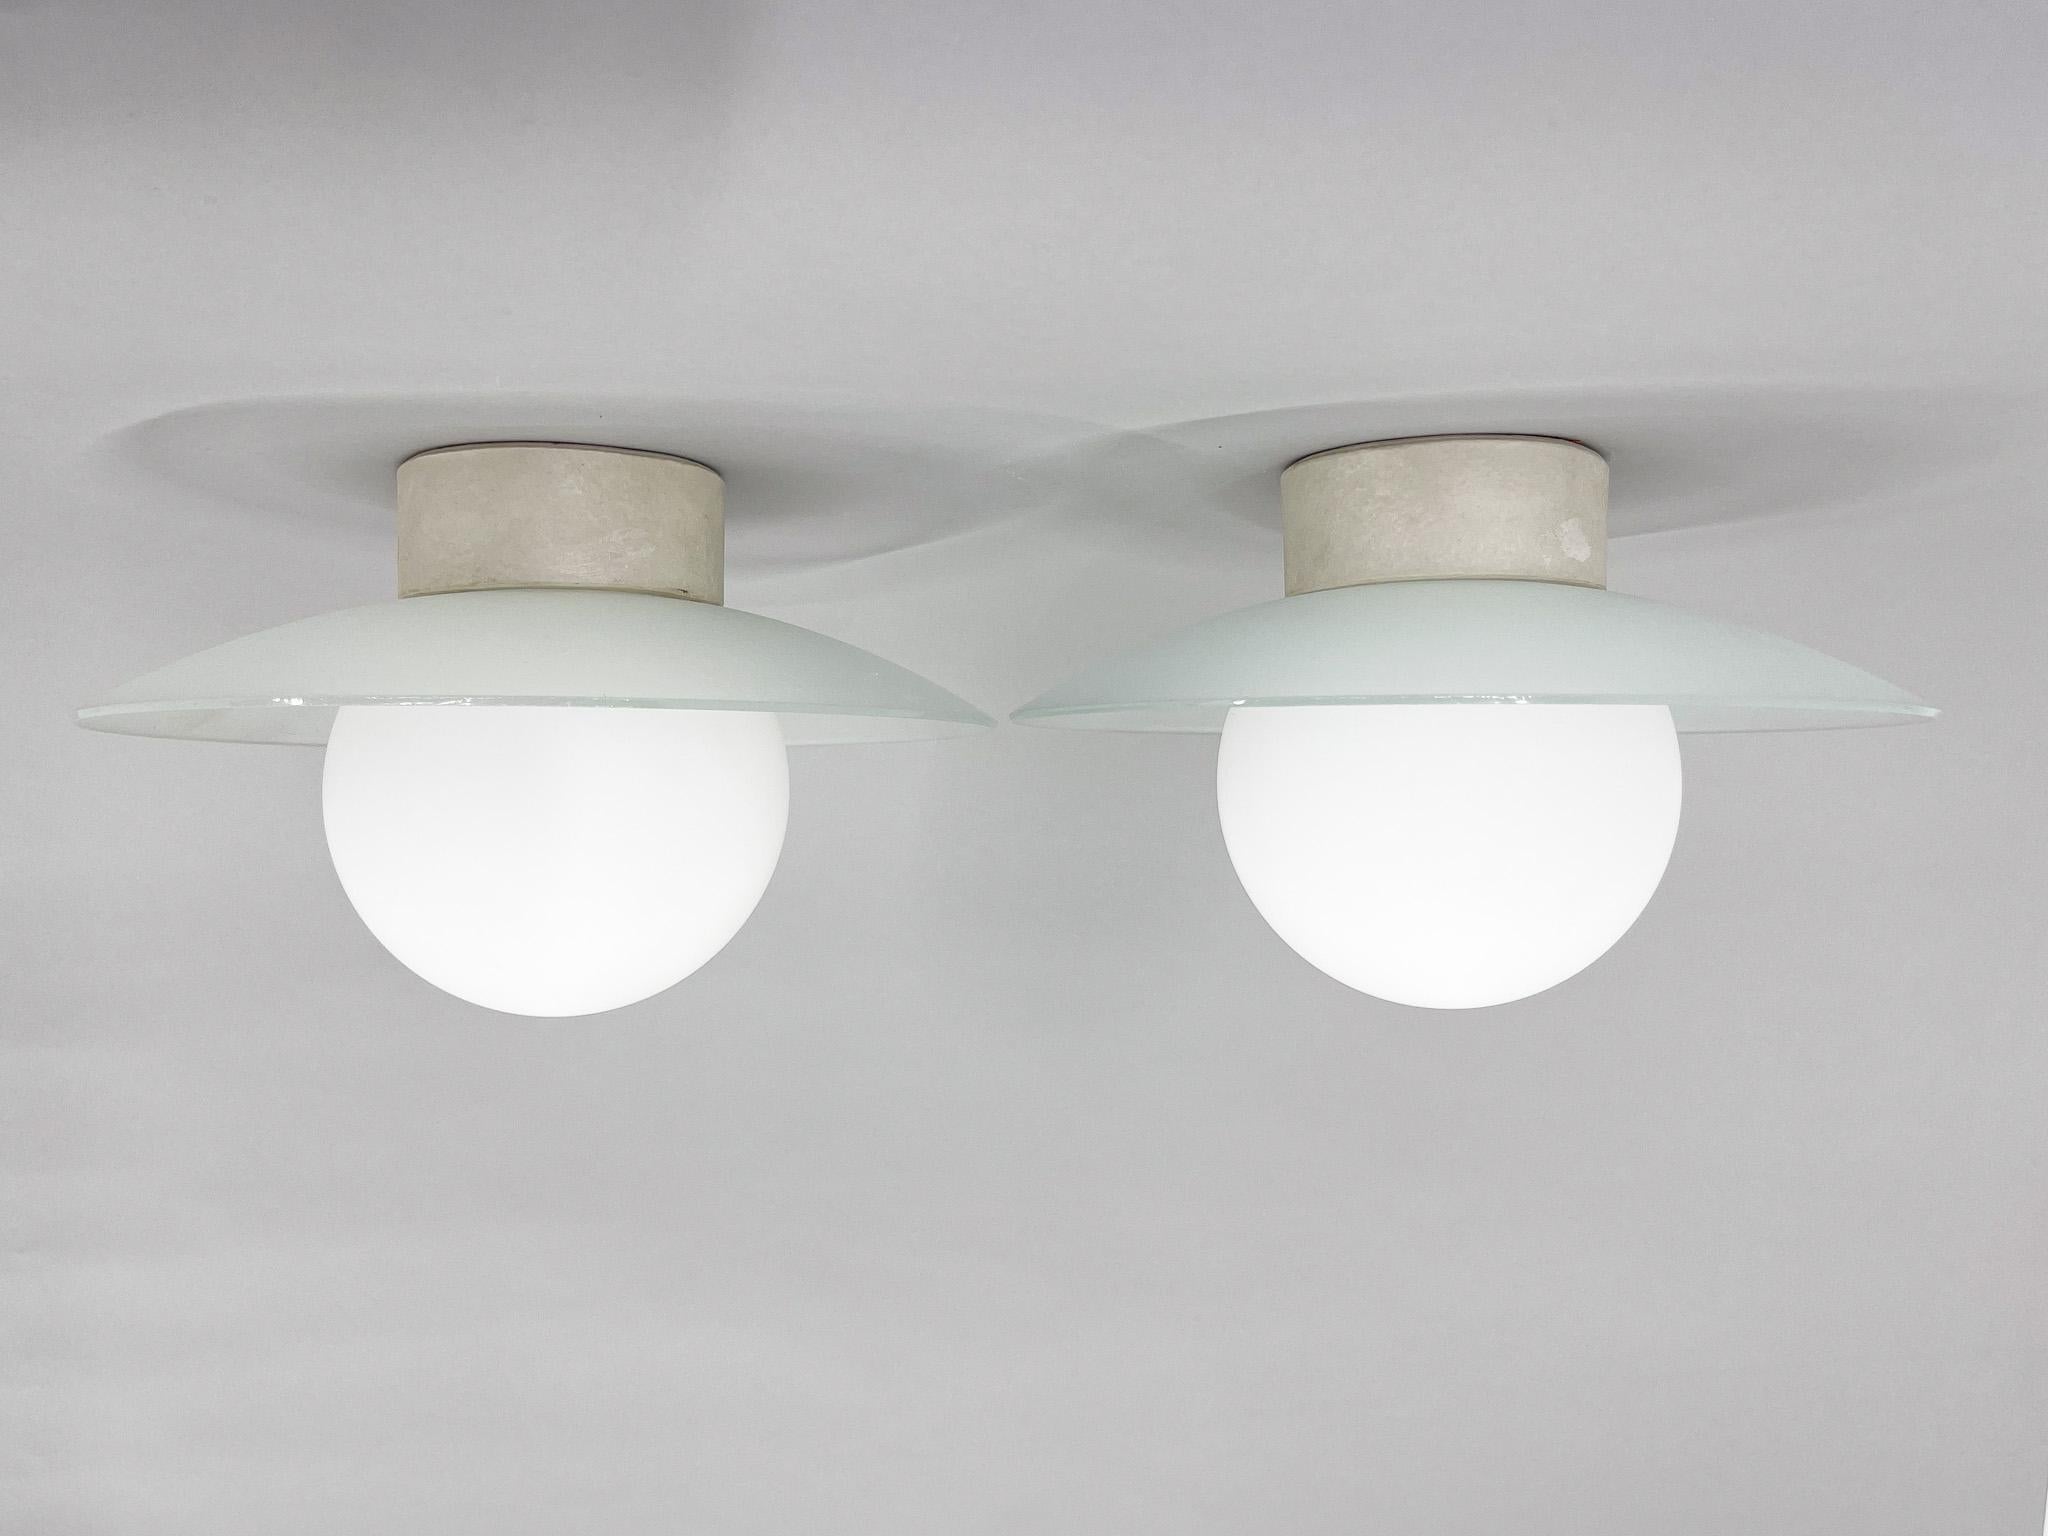 Seto of two vintage flush mounts or ceiling lights with ceramic base, milk glass ball and circle made of frosted glass. Unique piece of lighting. Rewired: 2x1 E25-E27 bulbs. US wiring compatible.